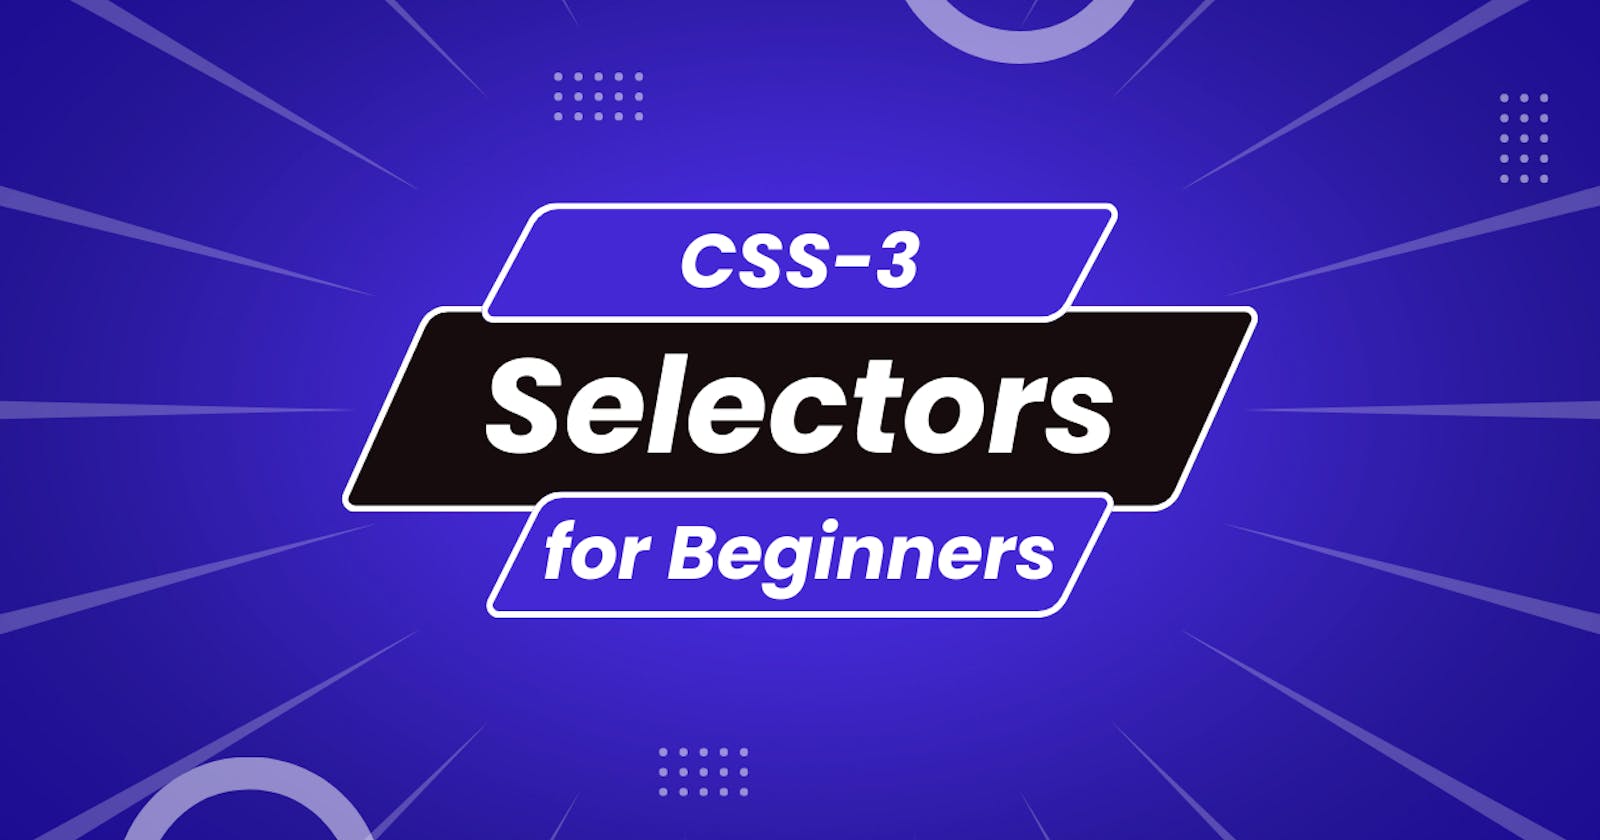 CSS-3 Selectors for Beginners